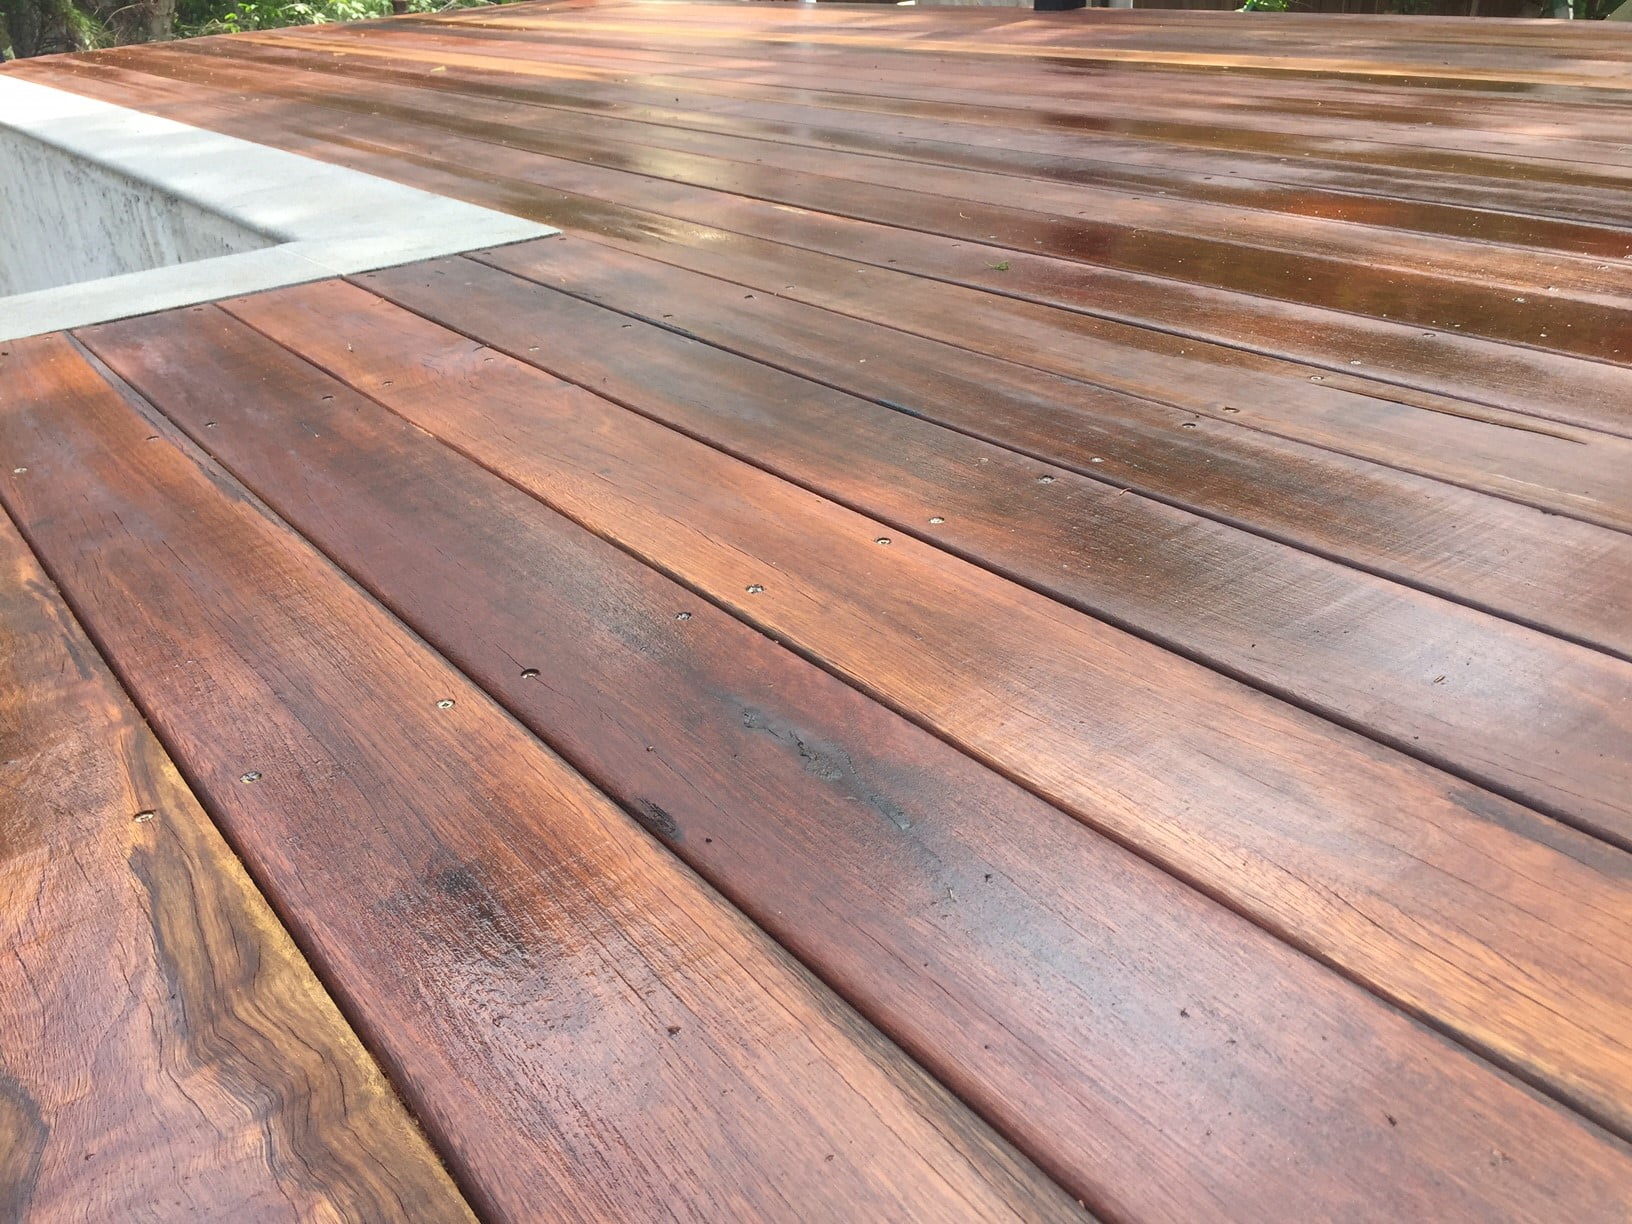 How to choose decking materials